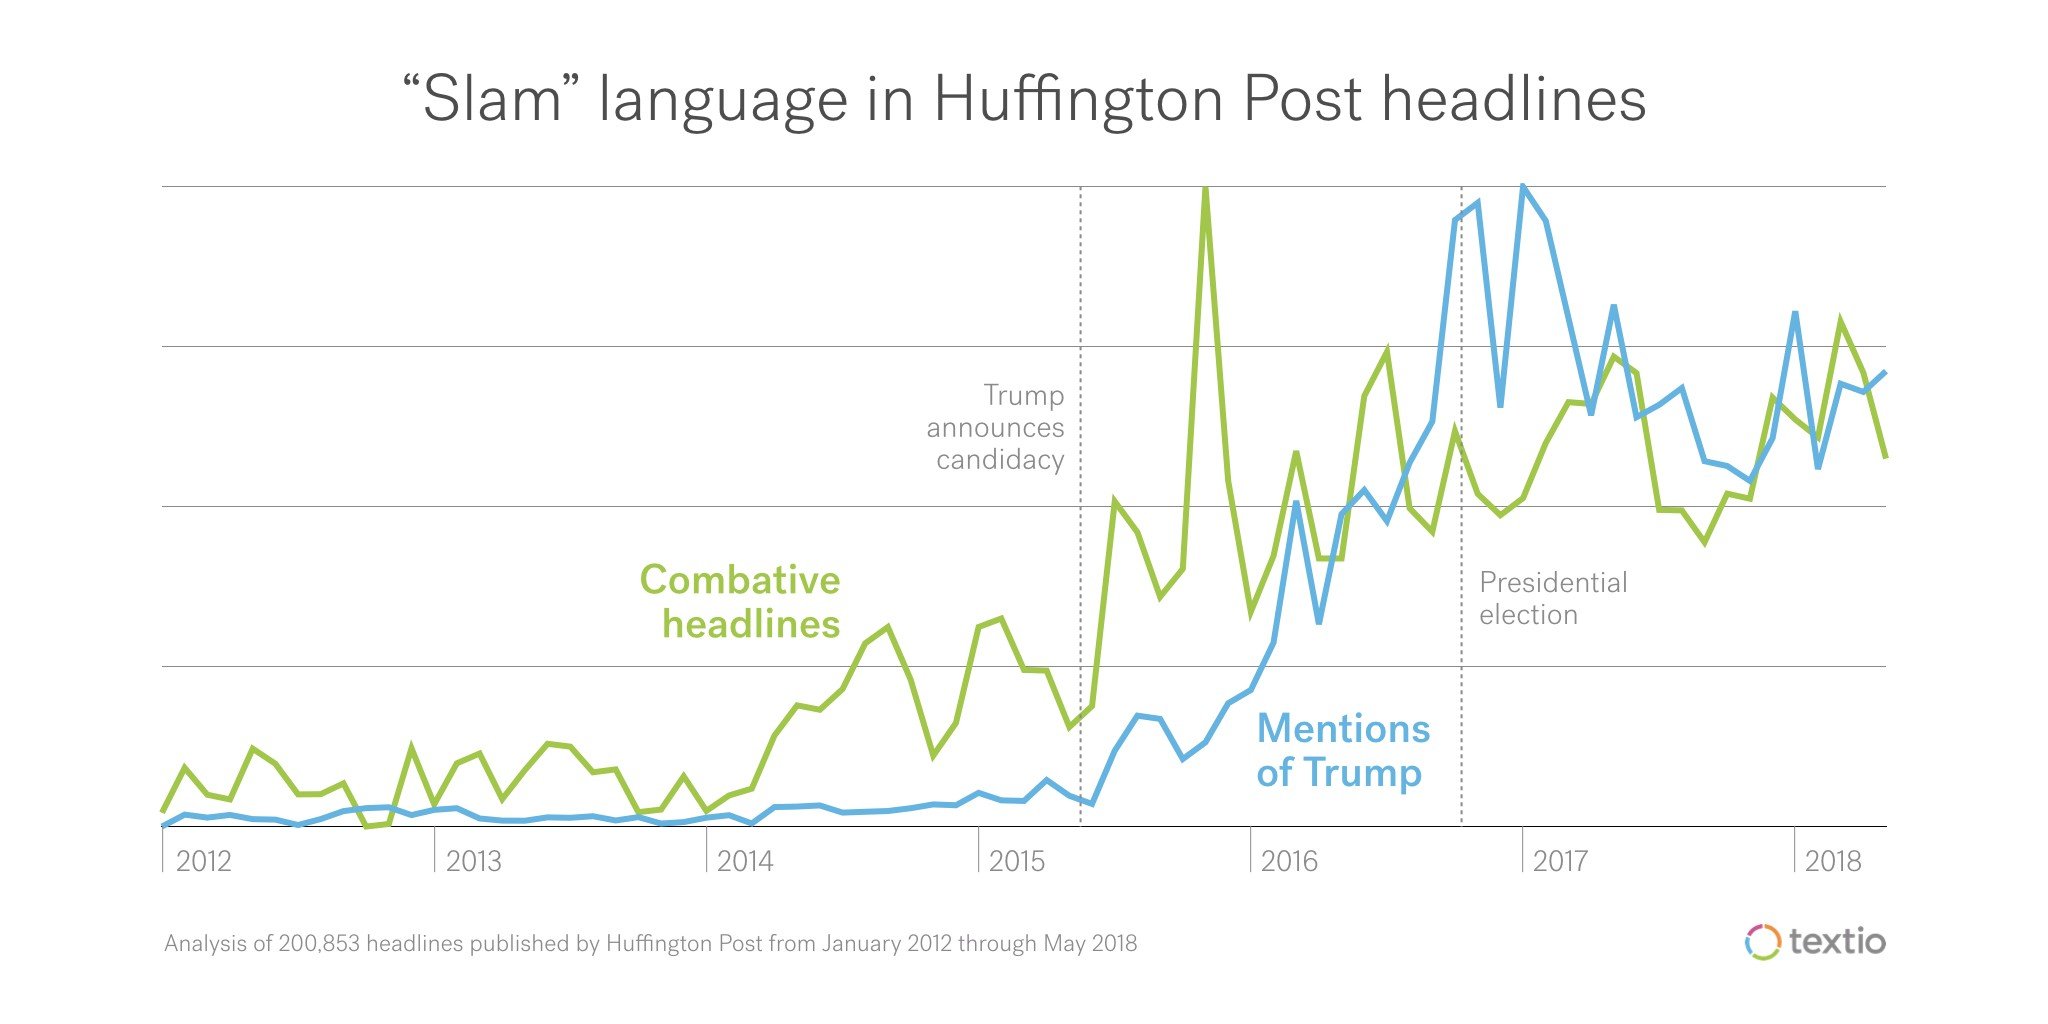 The occurrence of violent verbs in Huffington Post headlines tracks neatly with mentions of Donald Trump